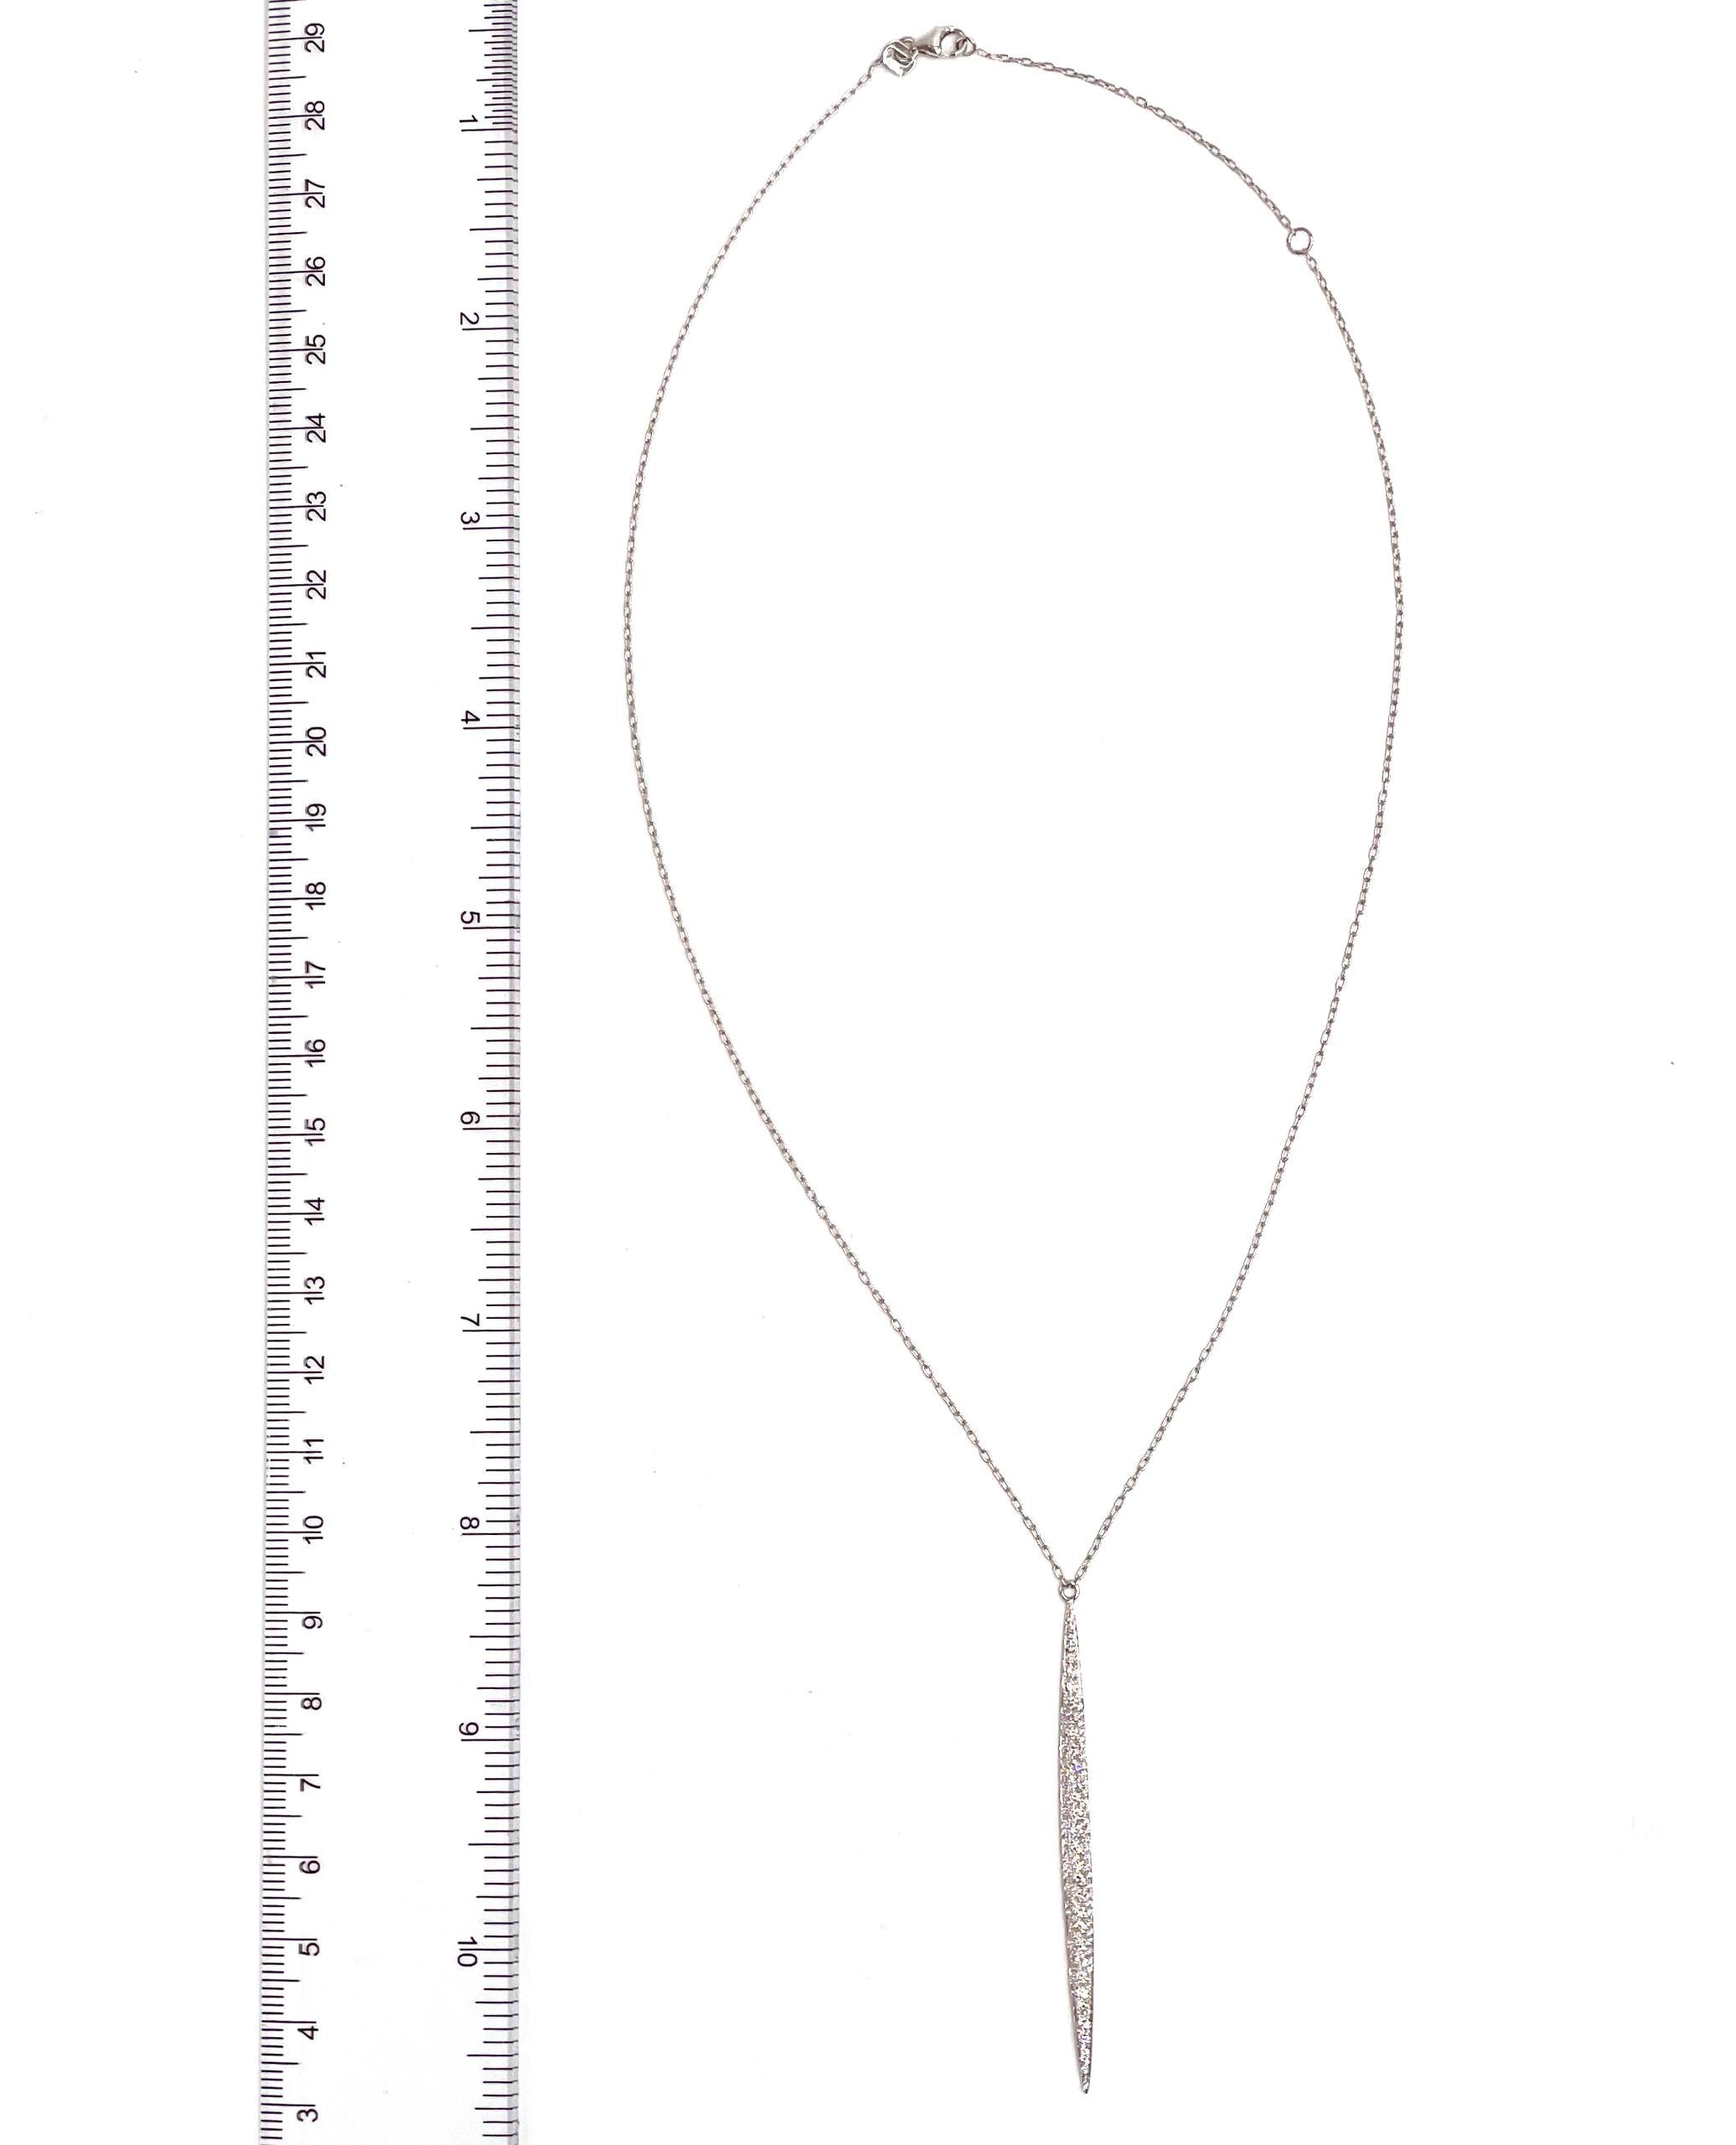 18K white gold necklace with 0.62 carat round diamonds.

* Can be worn 16 or 18 inches long
* The pendant is 2.5 inches long
* Diamonds are G/H color, VS2/SI1 clarity